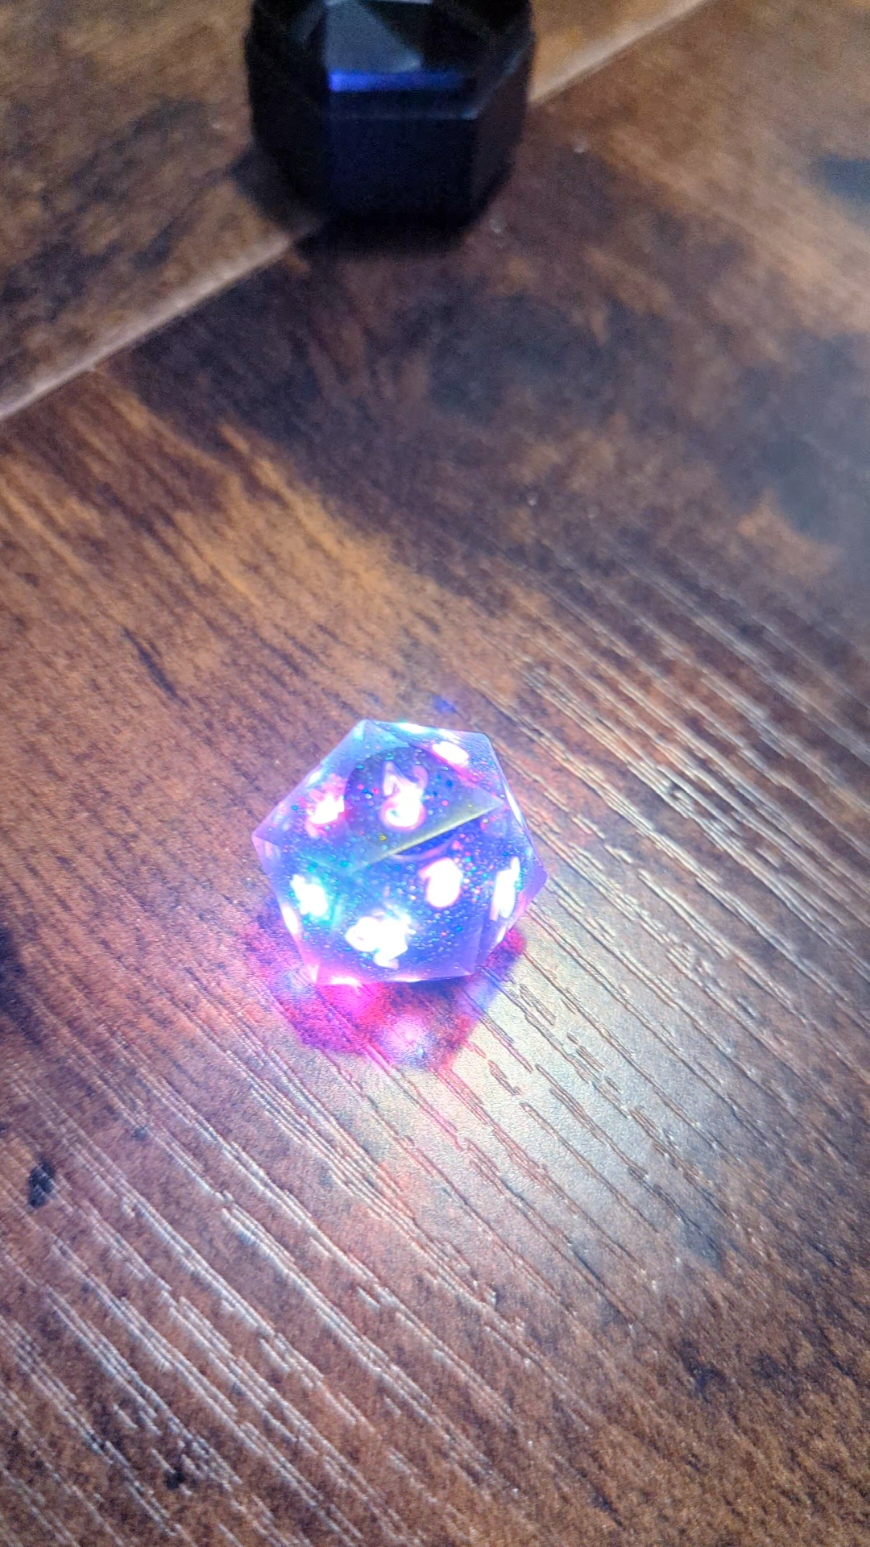 Just for Robo Owl in the pixels Discord. Really enjoying @Pixels Electronic Dice so far and only scratching the surface. More soon! #dicegoblin #diceroll #dice #pixelsdice #tabletoprpg #tabletopgaming #tabletopgames #tabletop #gaming #gamerentiktok 